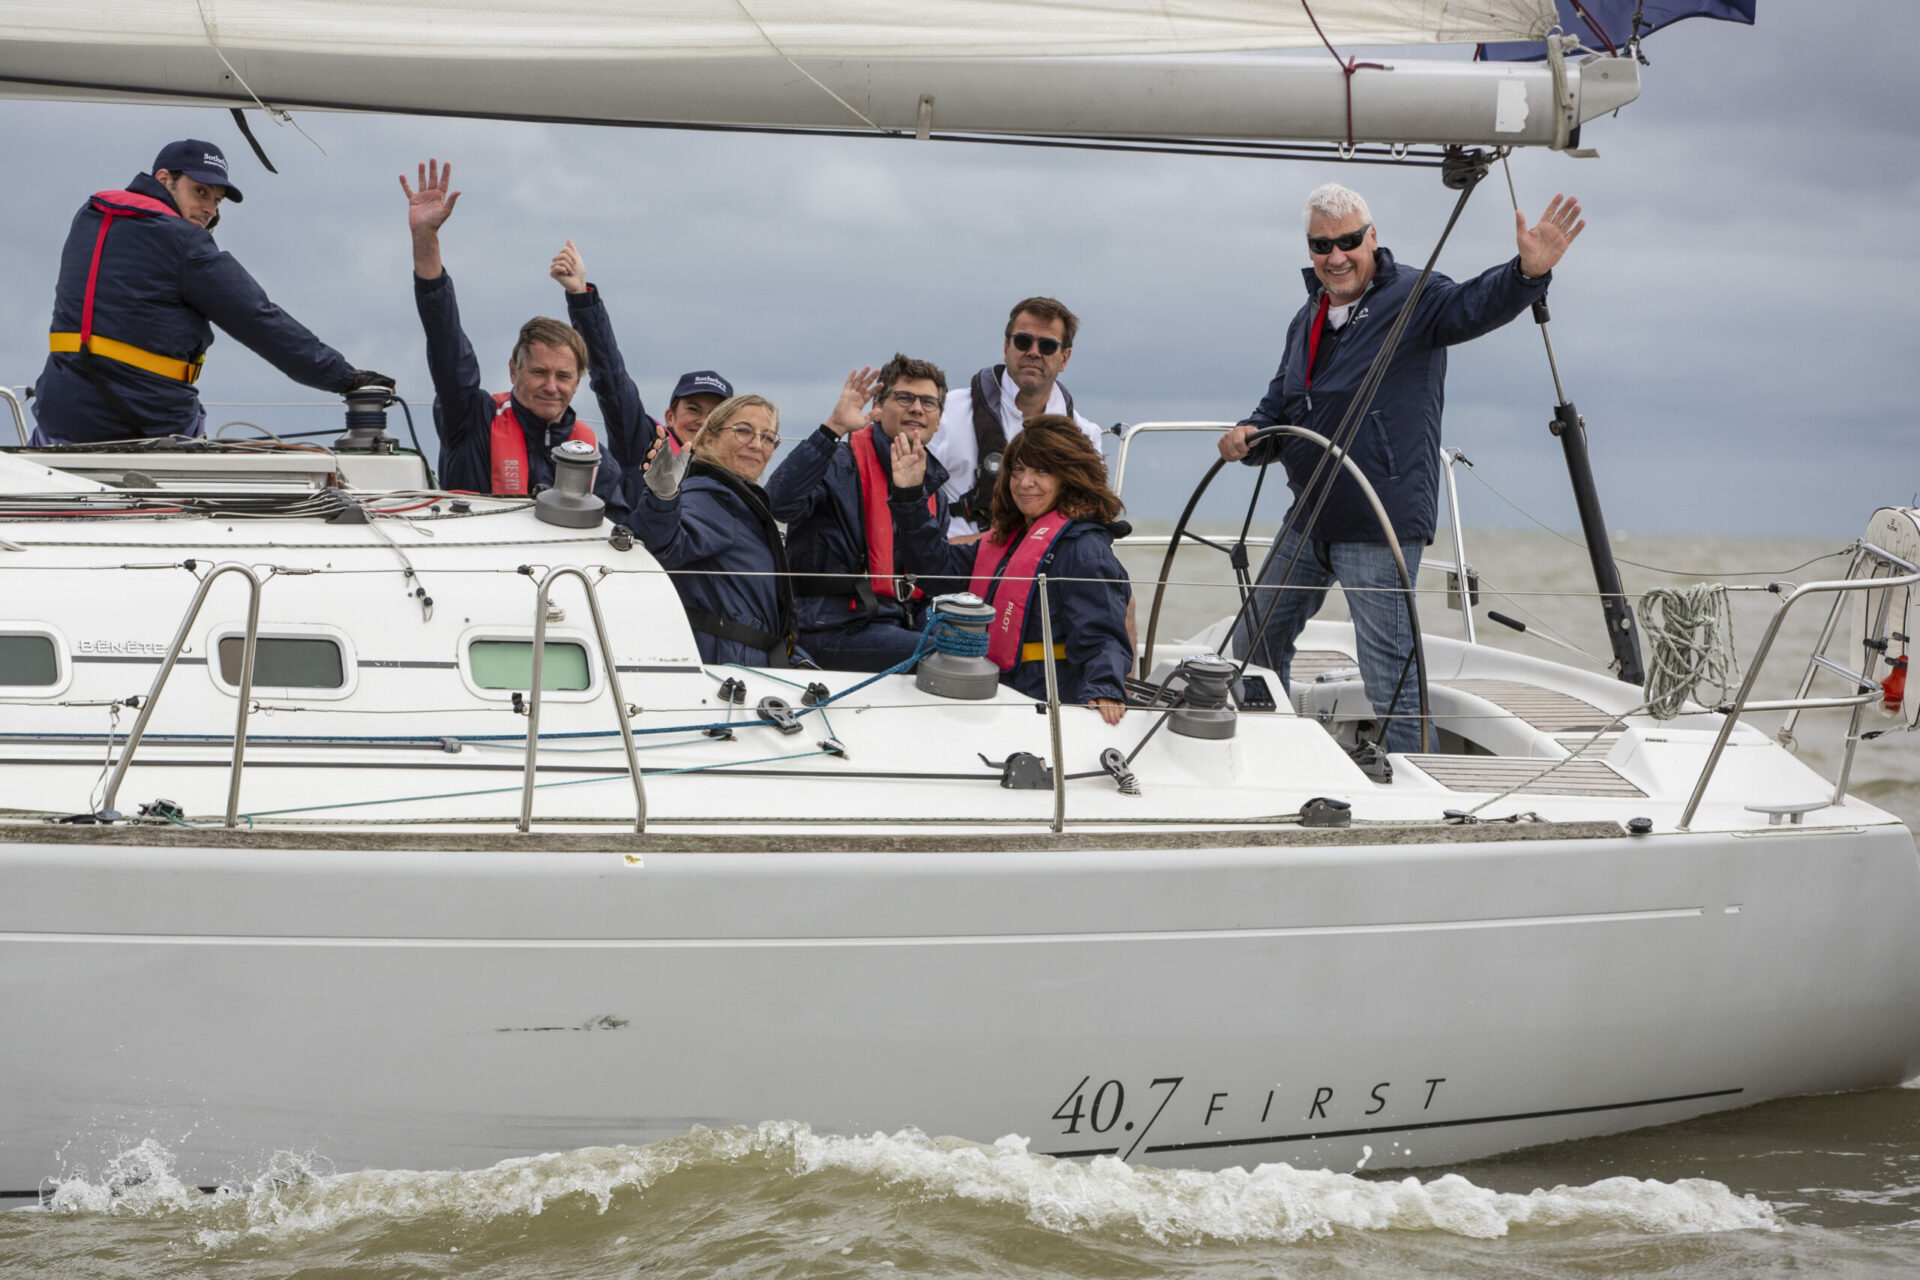 The Belgium Sotheby's International Realty team during the sail race organized by FlexiSailing with some of the best agents on the Belgian real estate market.